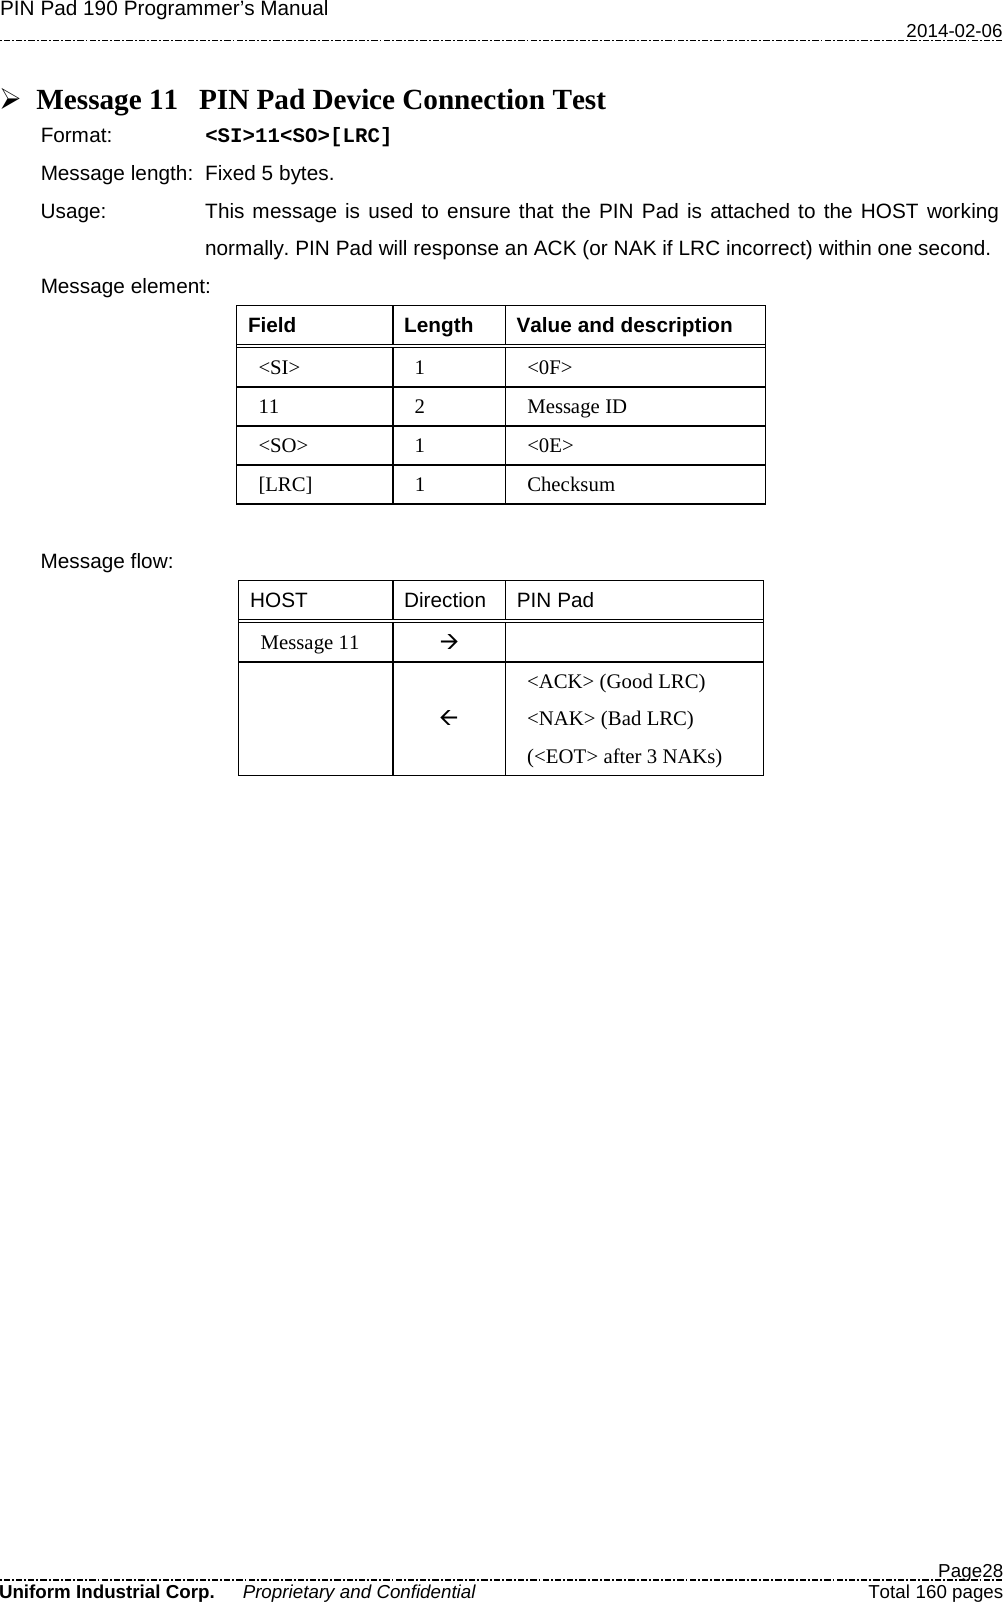 PIN Pad 190 Programmer’s Manual   2014-02-06  Page28 Uniform Industrial Corp. Proprietary and Confidential  Total 160 pages   Message 11 PIN Pad Device Connection Test Format:   &lt;SI&gt;11&lt;SO&gt;[LRC] Message length: Fixed 5 bytes. Usage: This message is used to ensure that the PIN Pad is attached to the HOST working normally. PIN Pad will response an ACK (or NAK if LRC incorrect) within one second. Message element: Field  Length  Value and description &lt;SI&gt;  1  &lt;0F&gt; 11  2  Message ID &lt;SO&gt;  1  &lt;0E&gt; [LRC]  1  Checksum  Message flow: HOST Direction PIN Pad Message 11     &lt;ACK&gt; (Good LRC) &lt;NAK&gt; (Bad LRC) (&lt;EOT&gt; after 3 NAKs)  